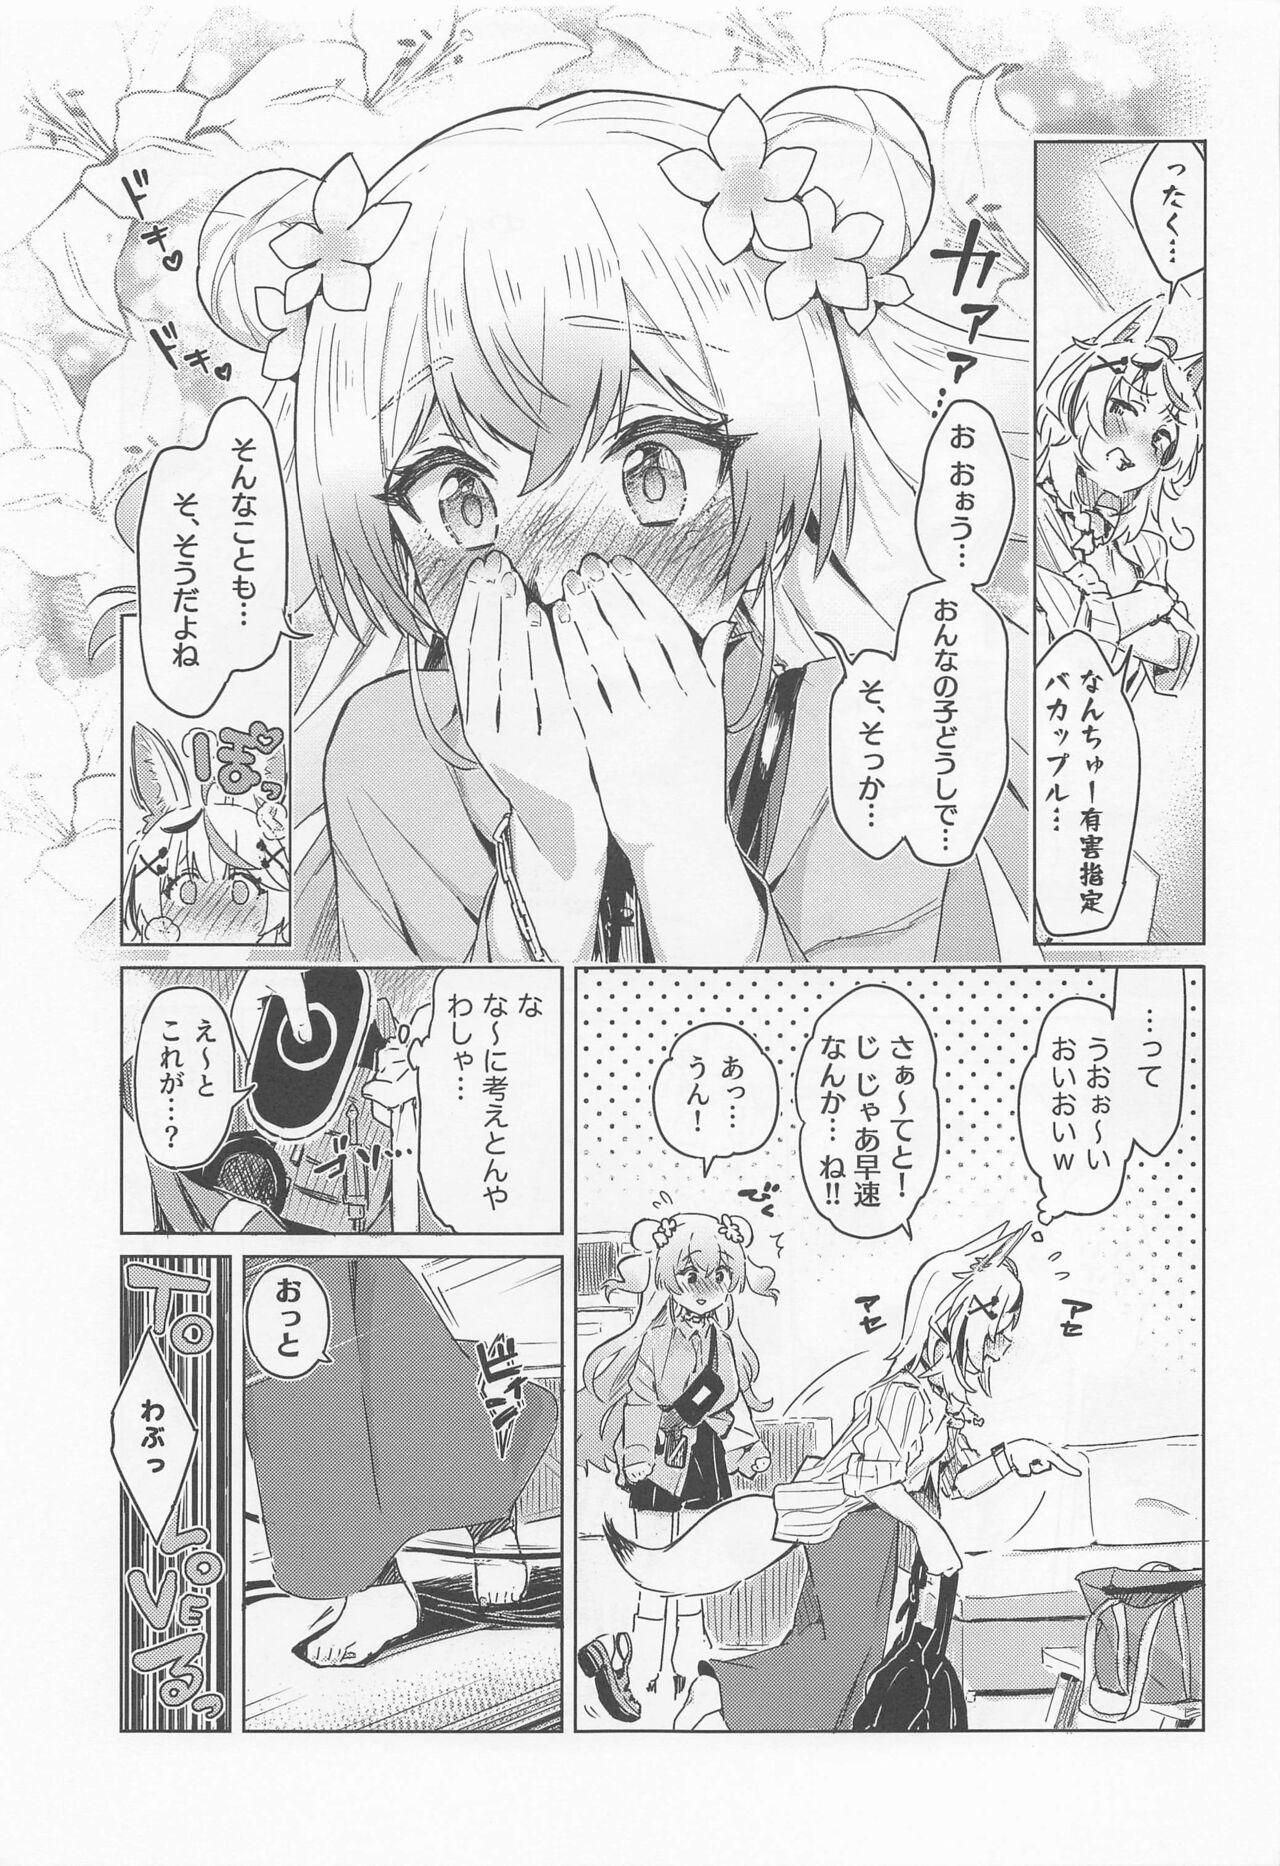 Blond Fennec wa Iseijin no Yume o Miru ka - Does The Fennec Dream of The Lovely Visitor? - Hololive Mamando - Page 10